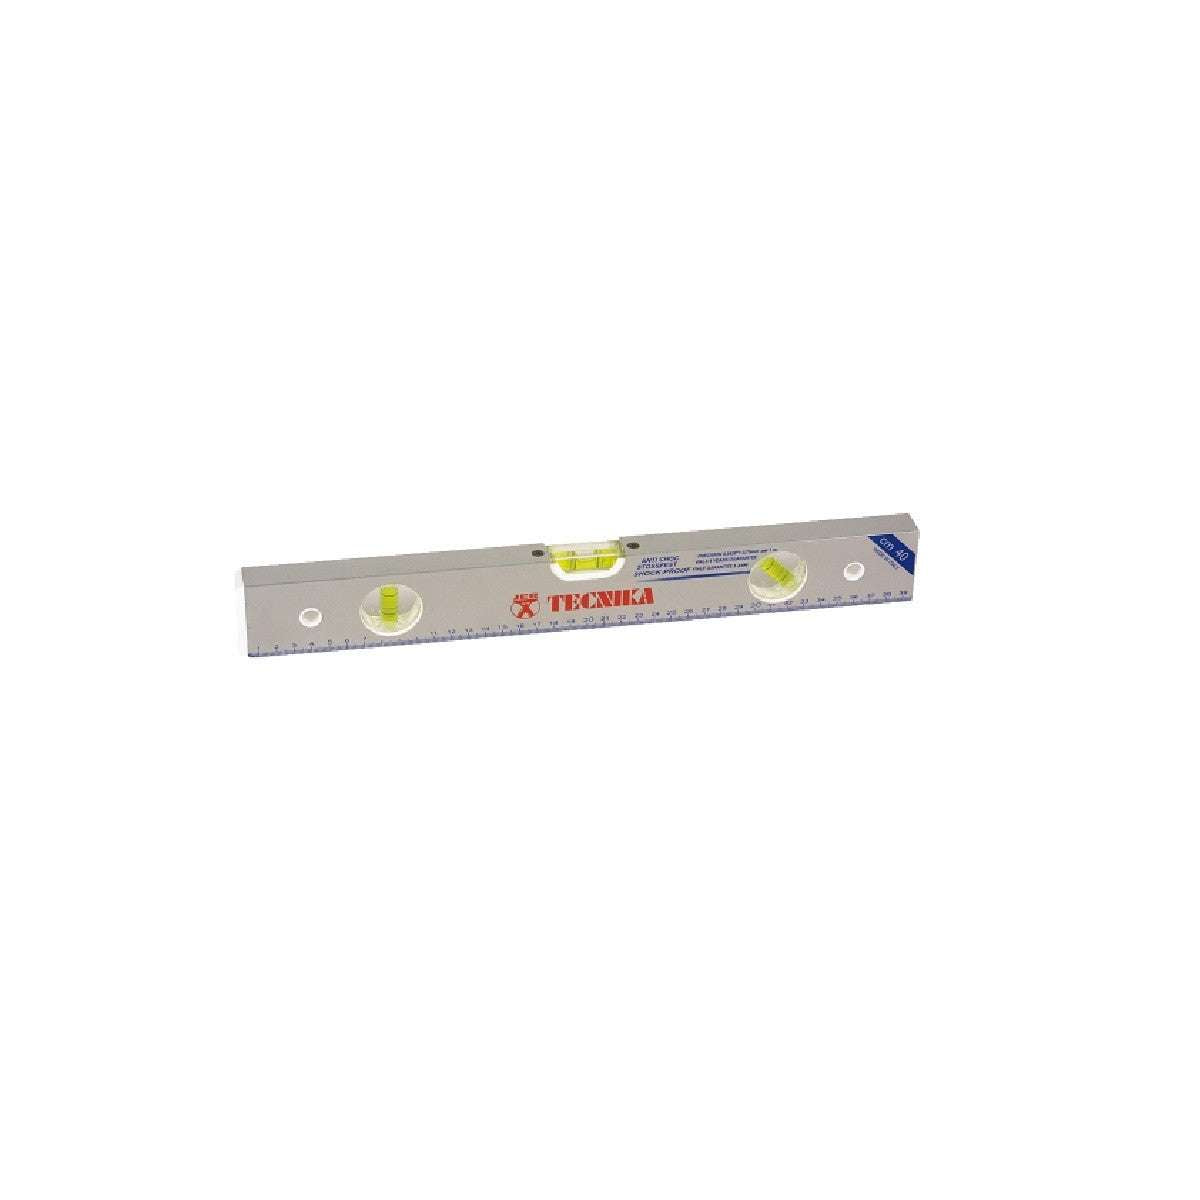 Tecnika spirit level with magnets in profile 50cm - LTF 12220